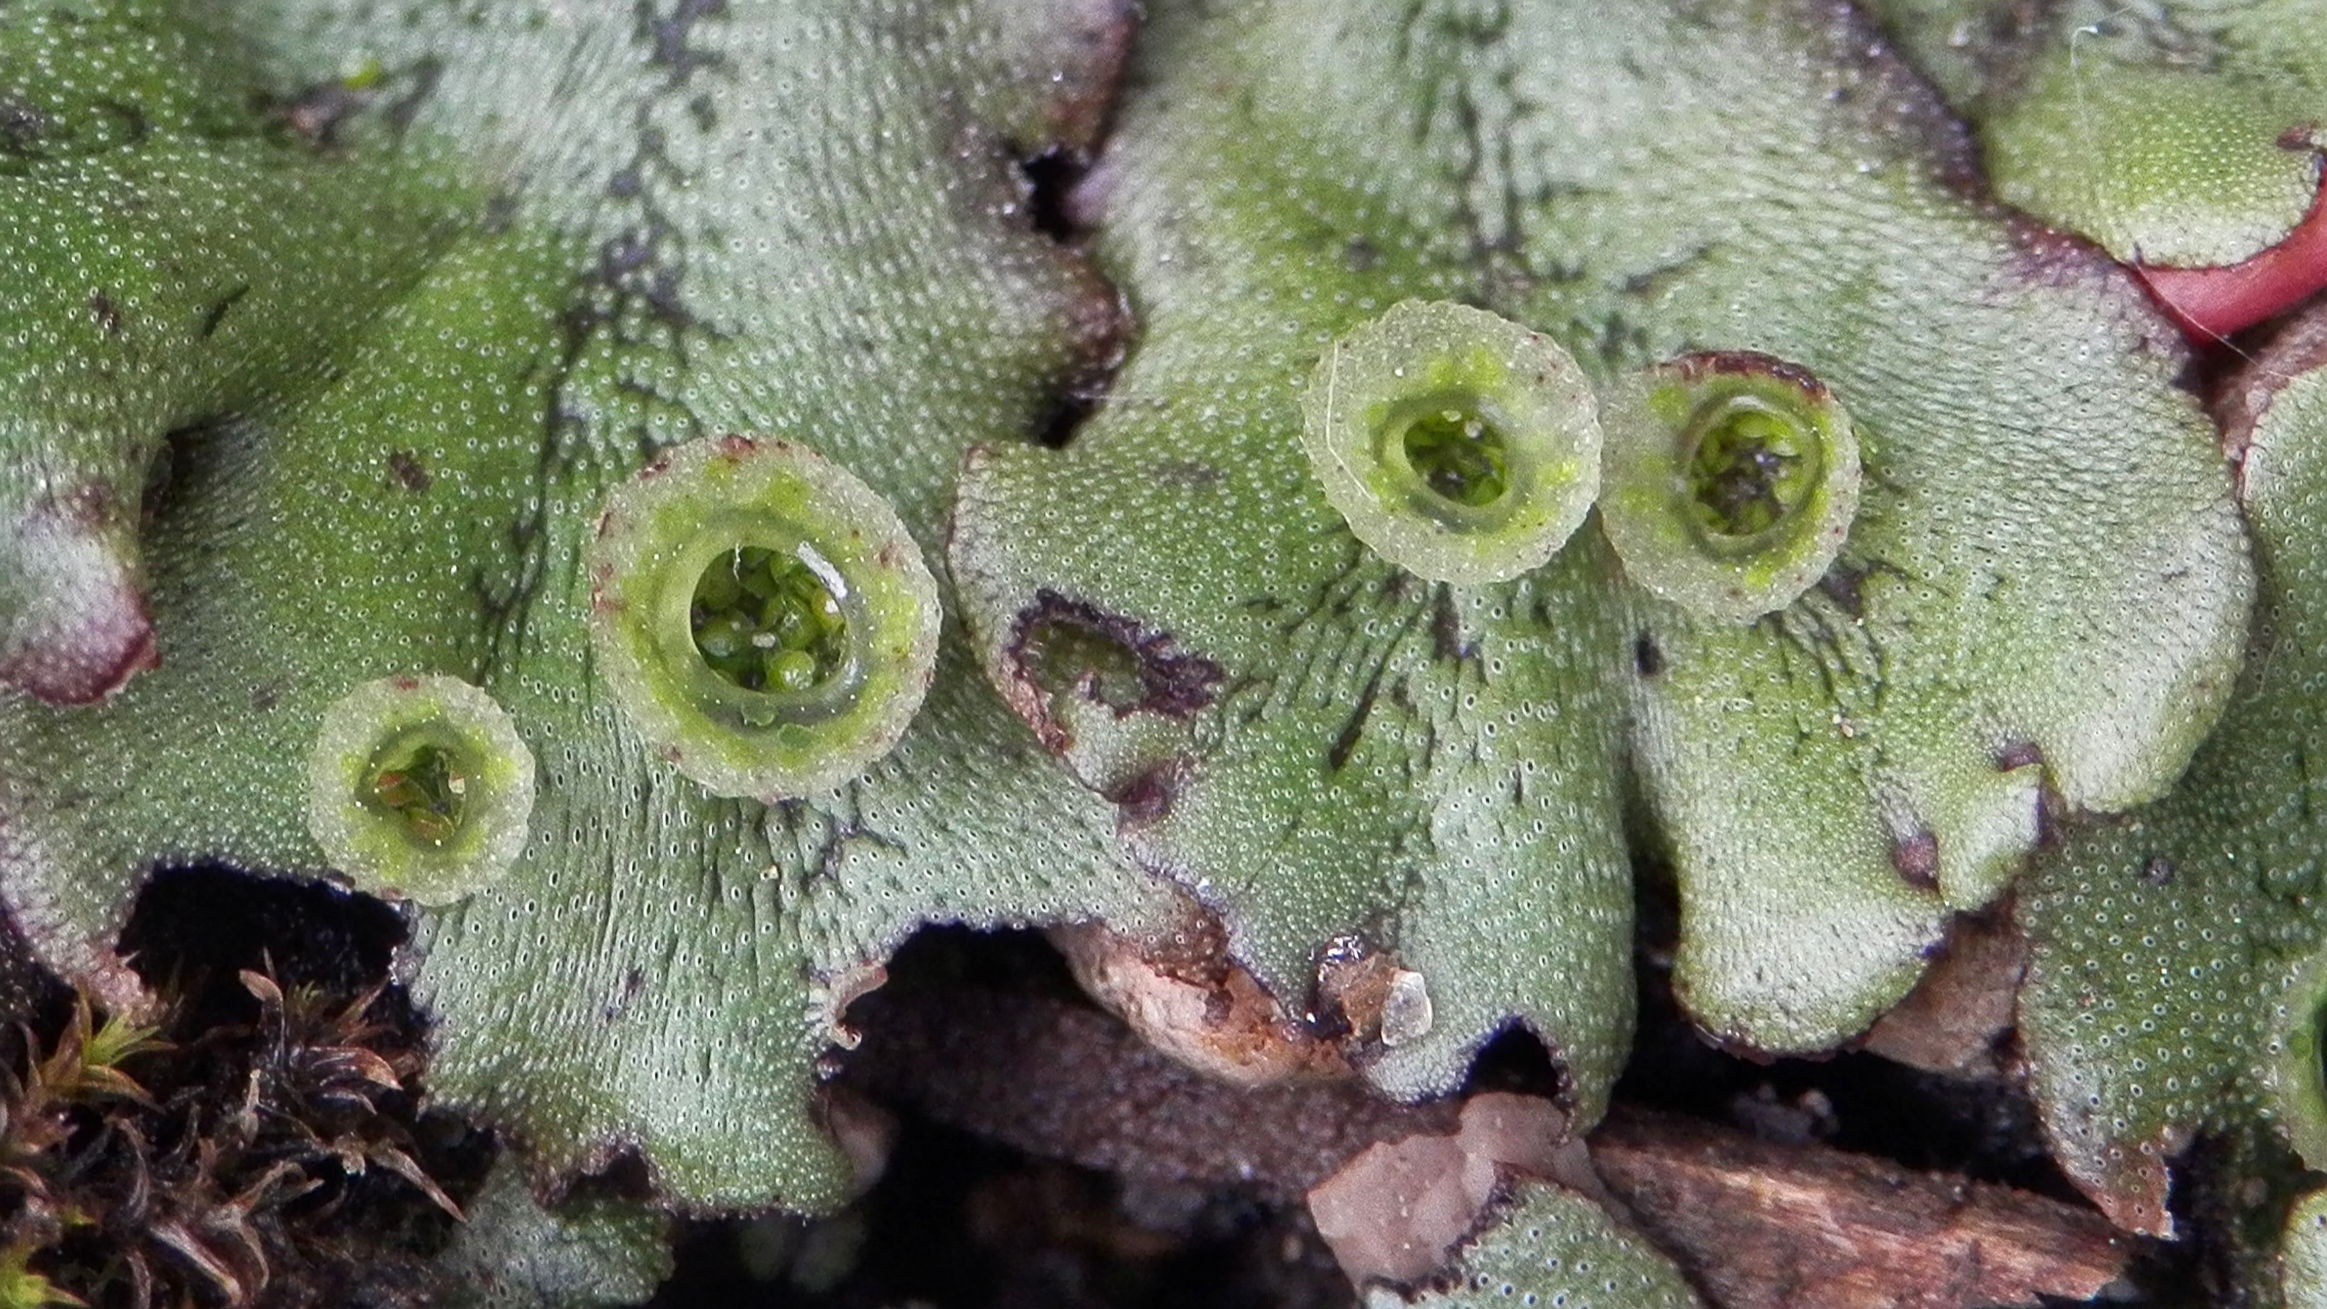 a close up of the liverwort leaves showing the 'splash cups' used for reproduction